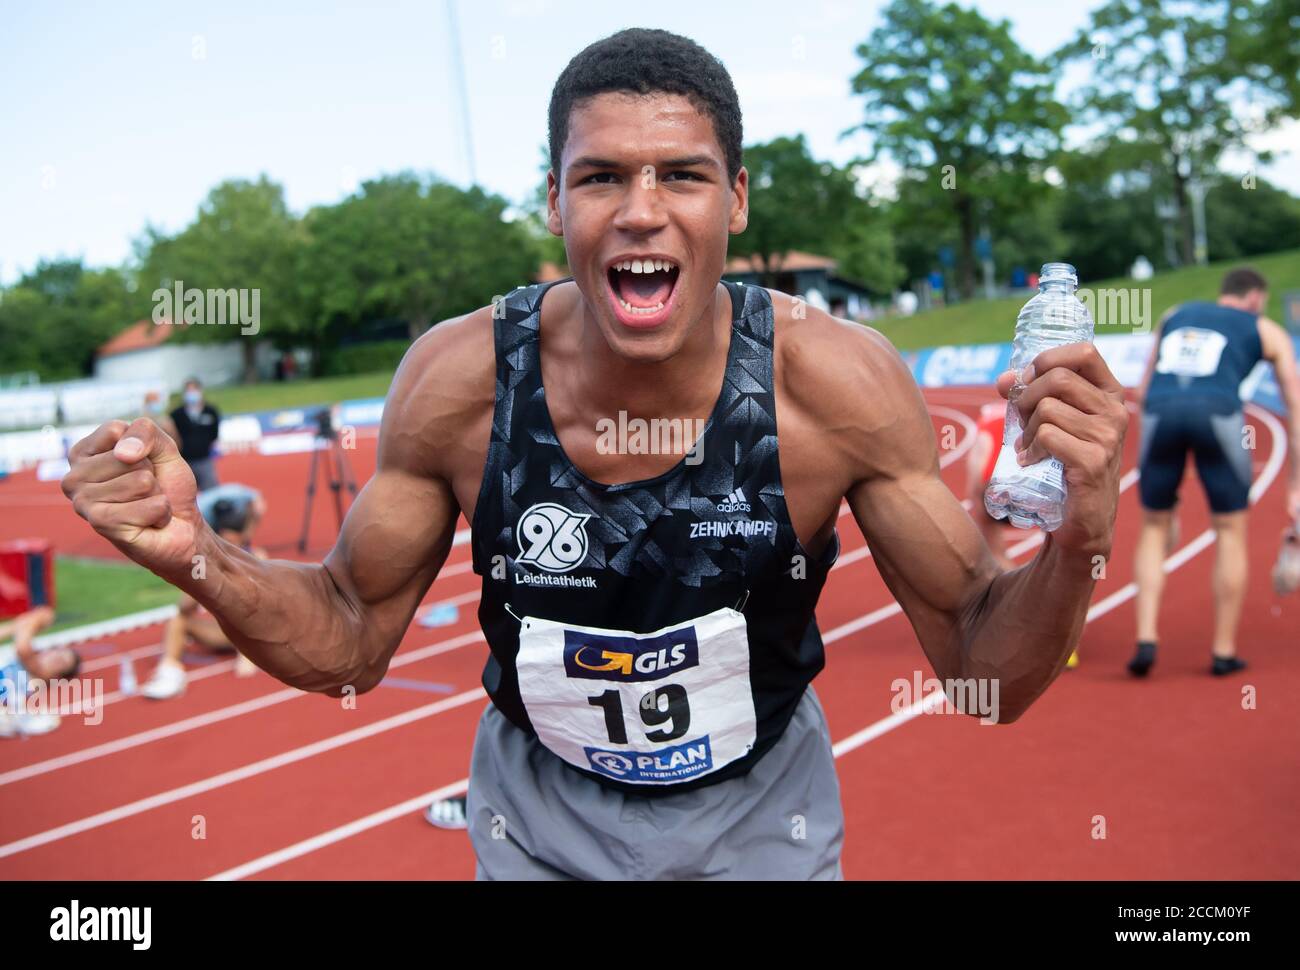 Vaterstetten, Germany. 23rd Aug, 2020. Athletics: German championship in  all-around in the sports centre, decathlon, men: Malik Diakite cheers at  the finish after his run over 1500m. Diakite is the German Champion